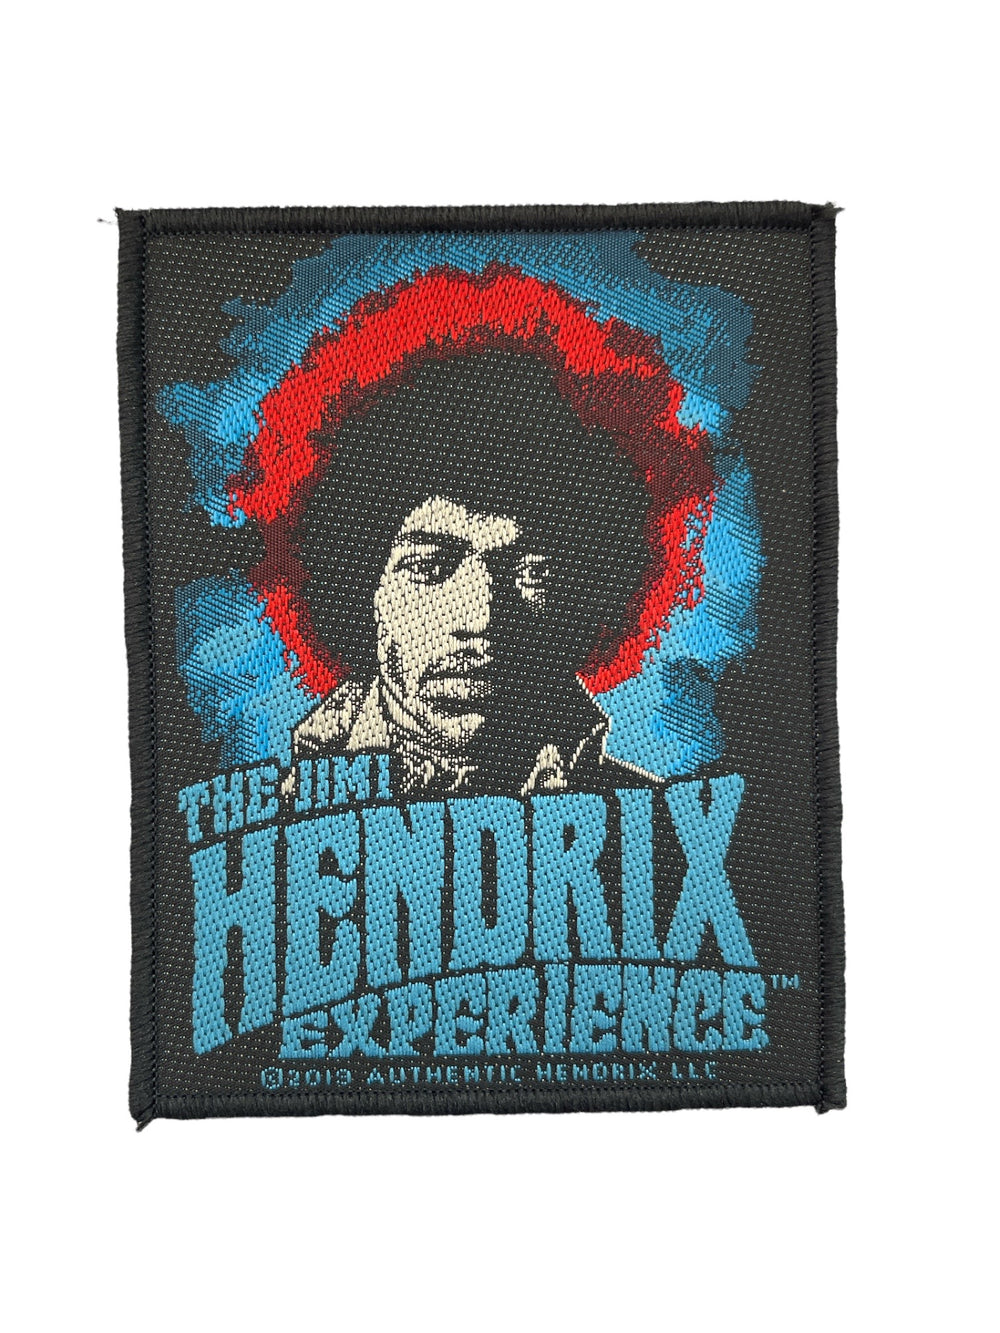 Jimi Hendrix Experience Official Woven Patch Brand New